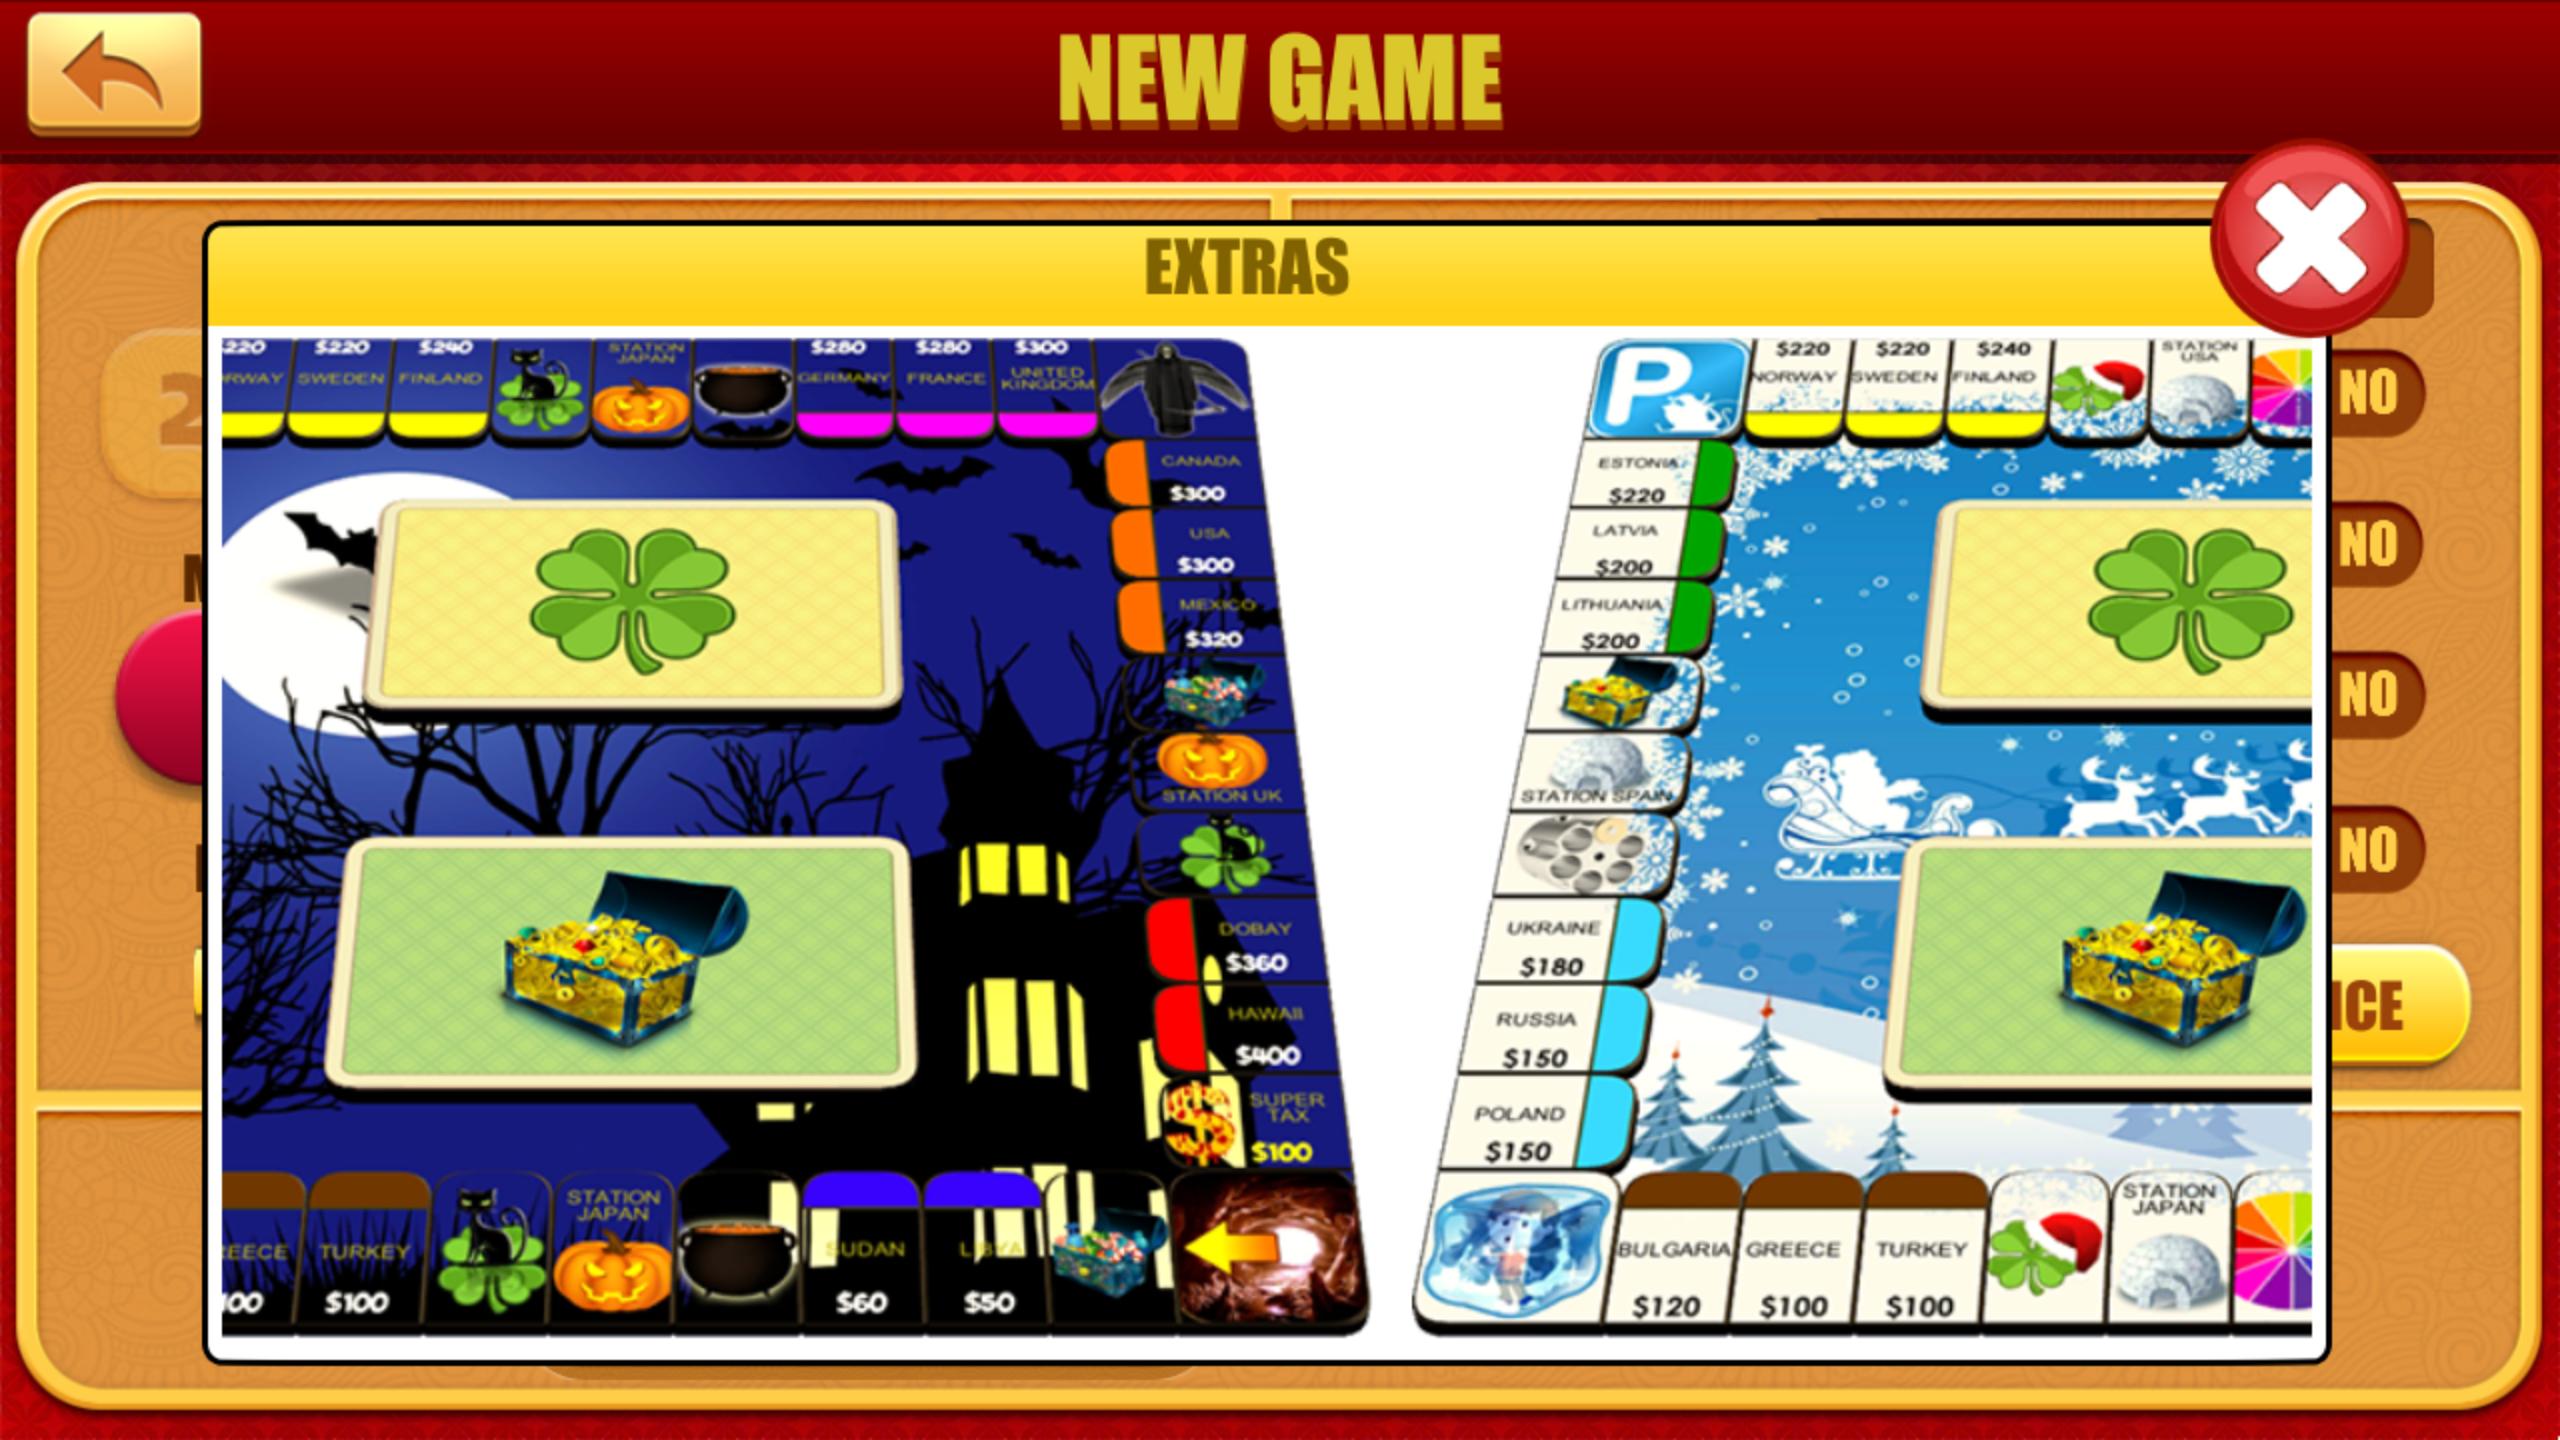 Rento - Dice Board Game Online for Android - APK Download